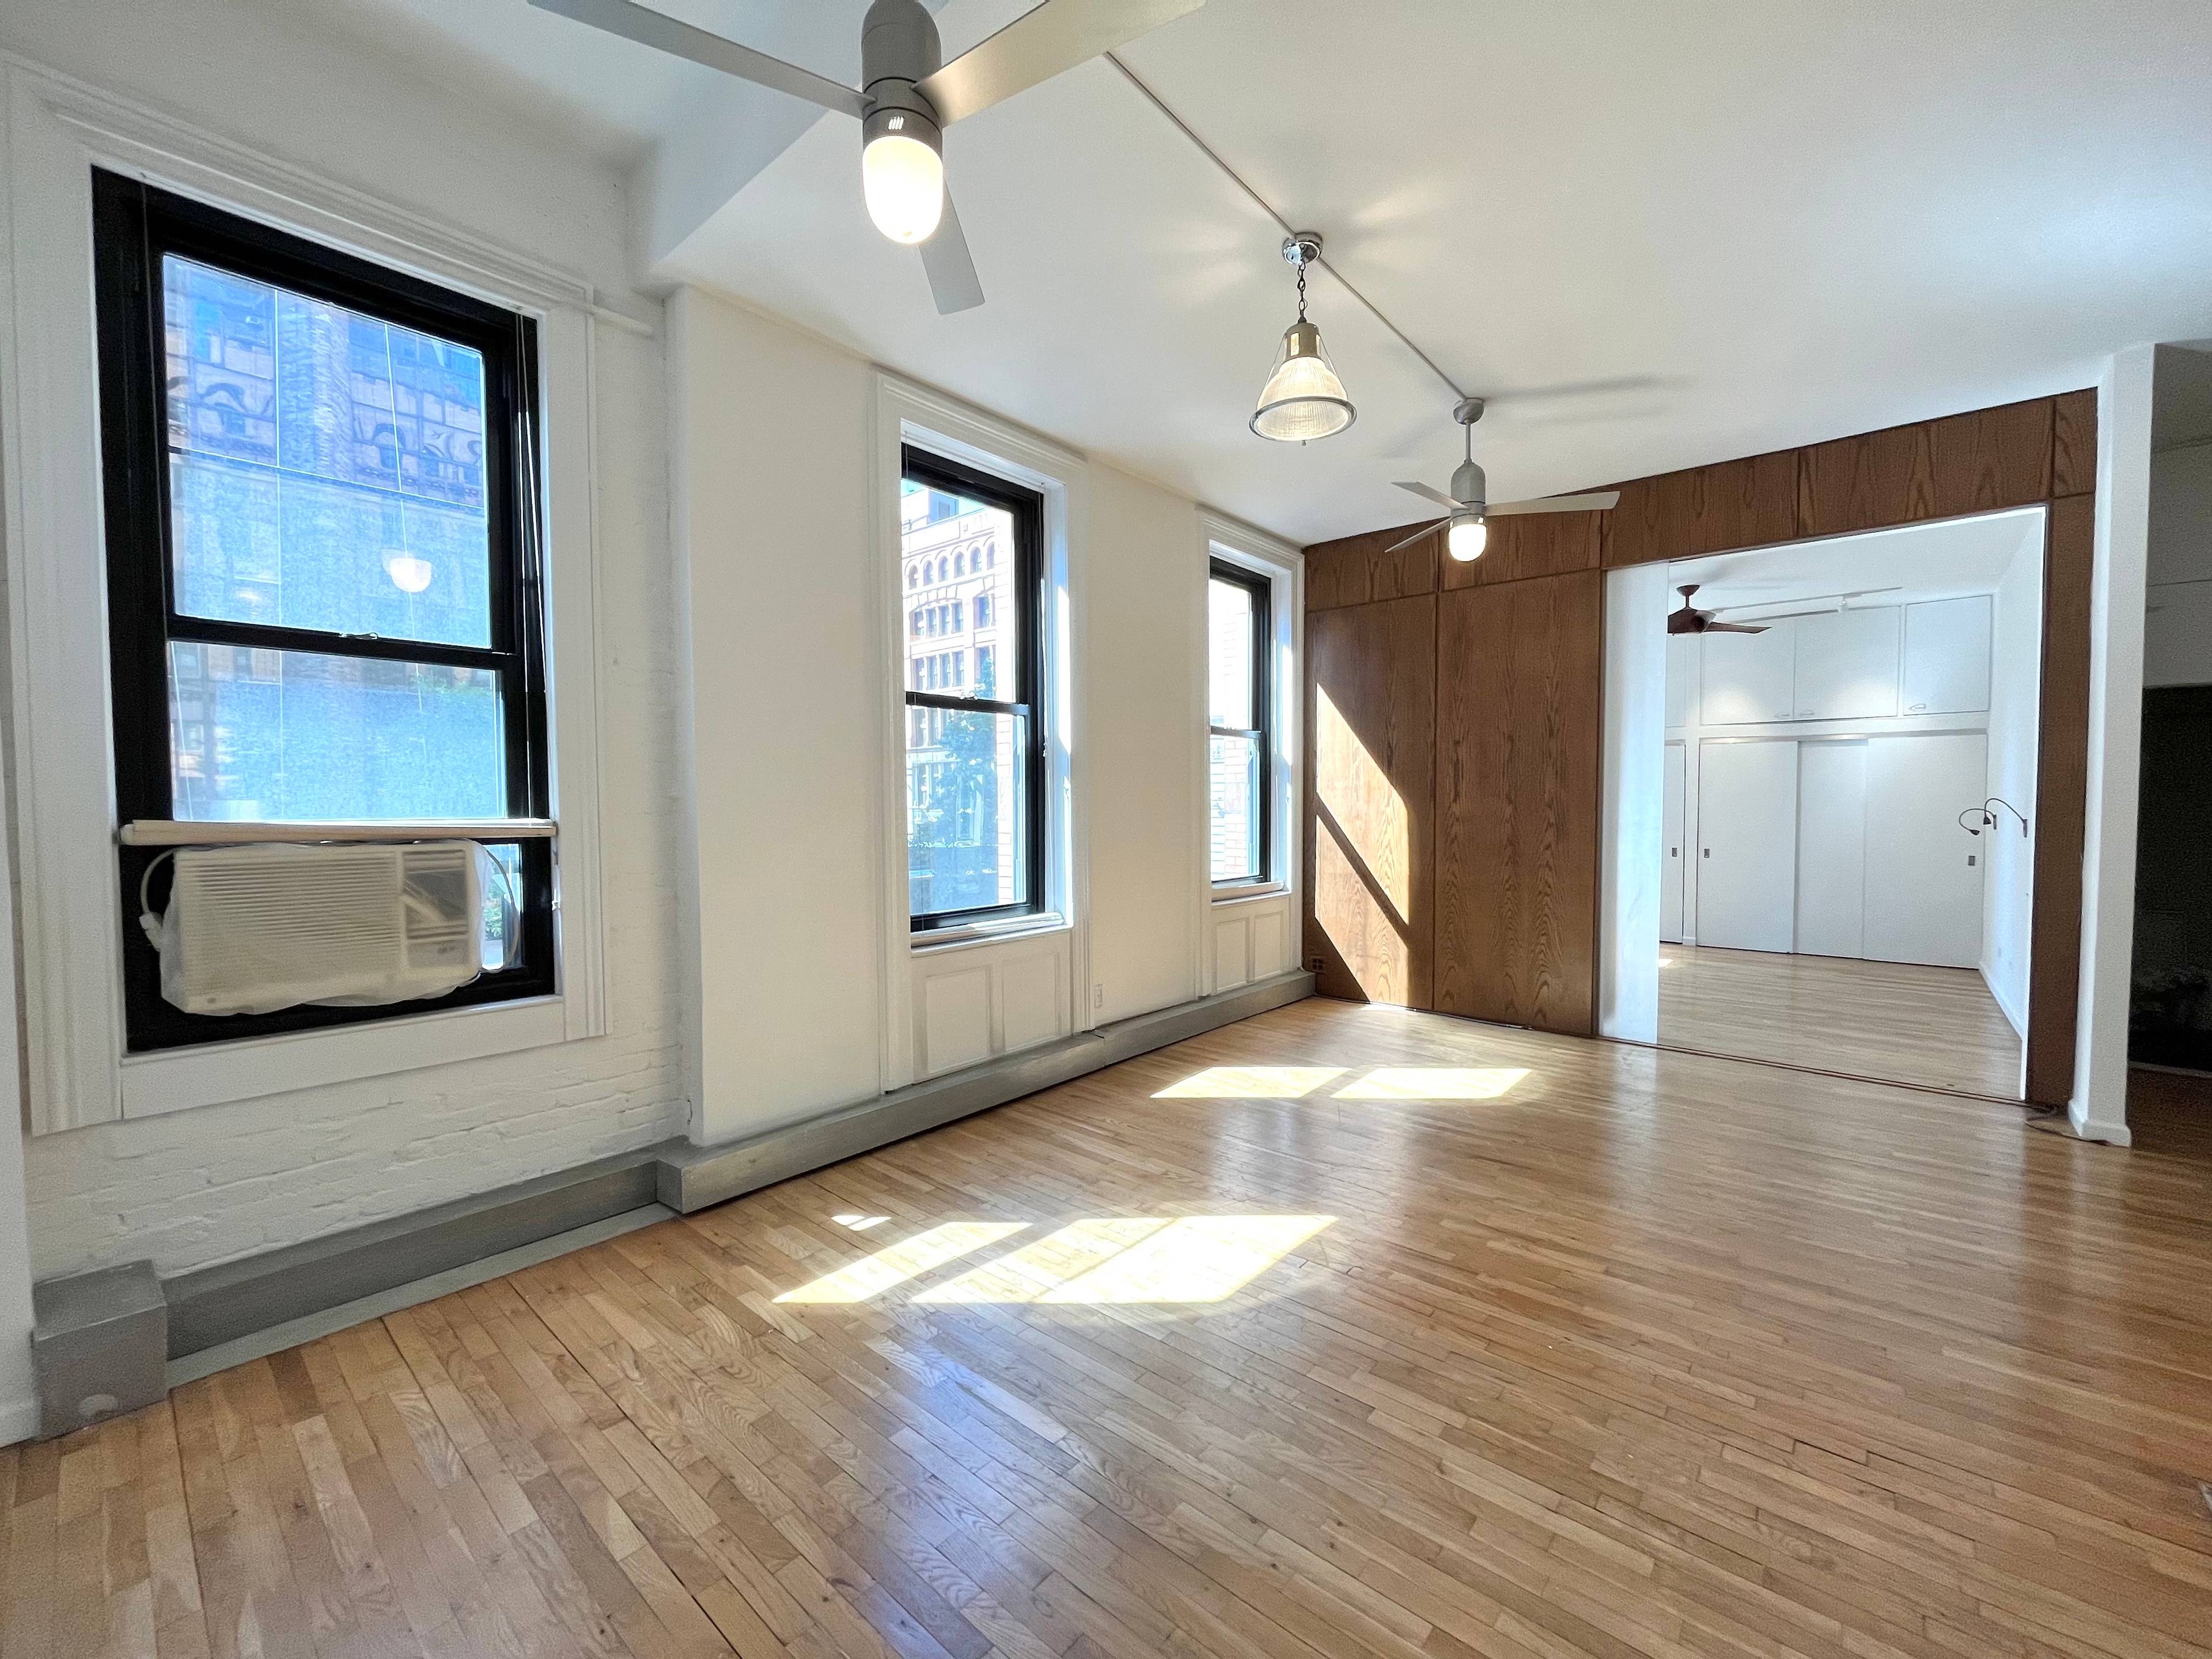 Welcome to this spacious one bedroom loft with high ceilings, tall windows, and a wide layout.